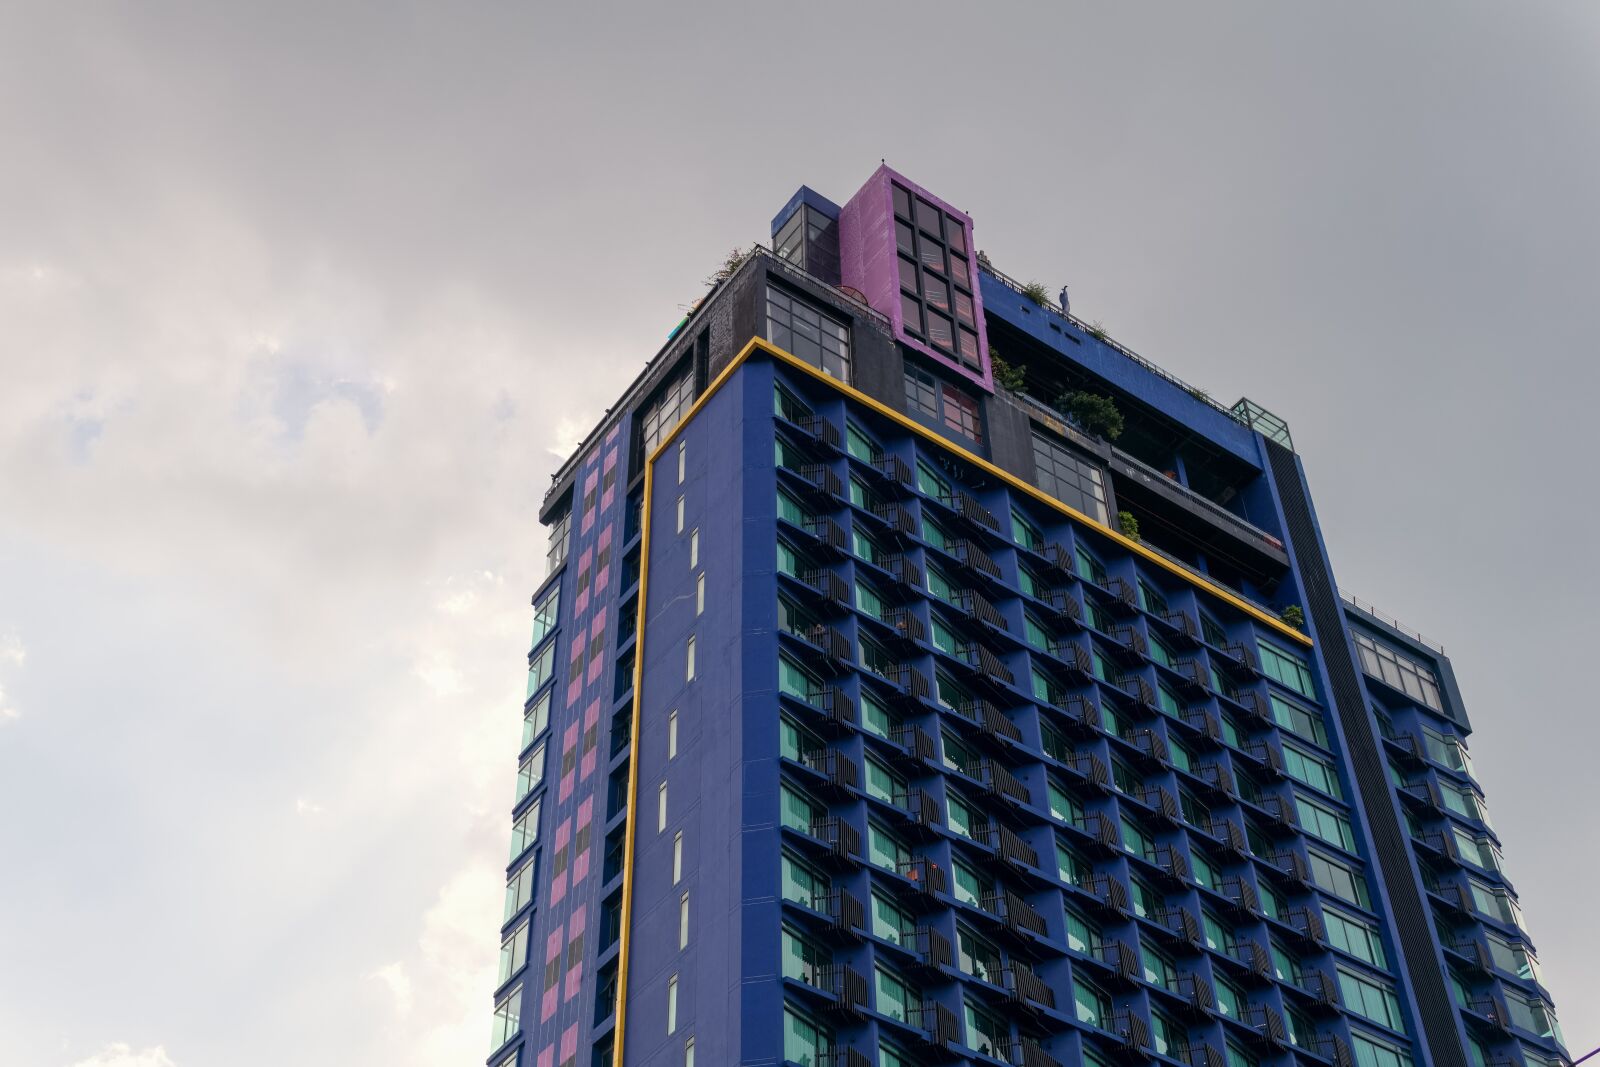 Sony a6000 sample photo. Hotel, building, architecture photography